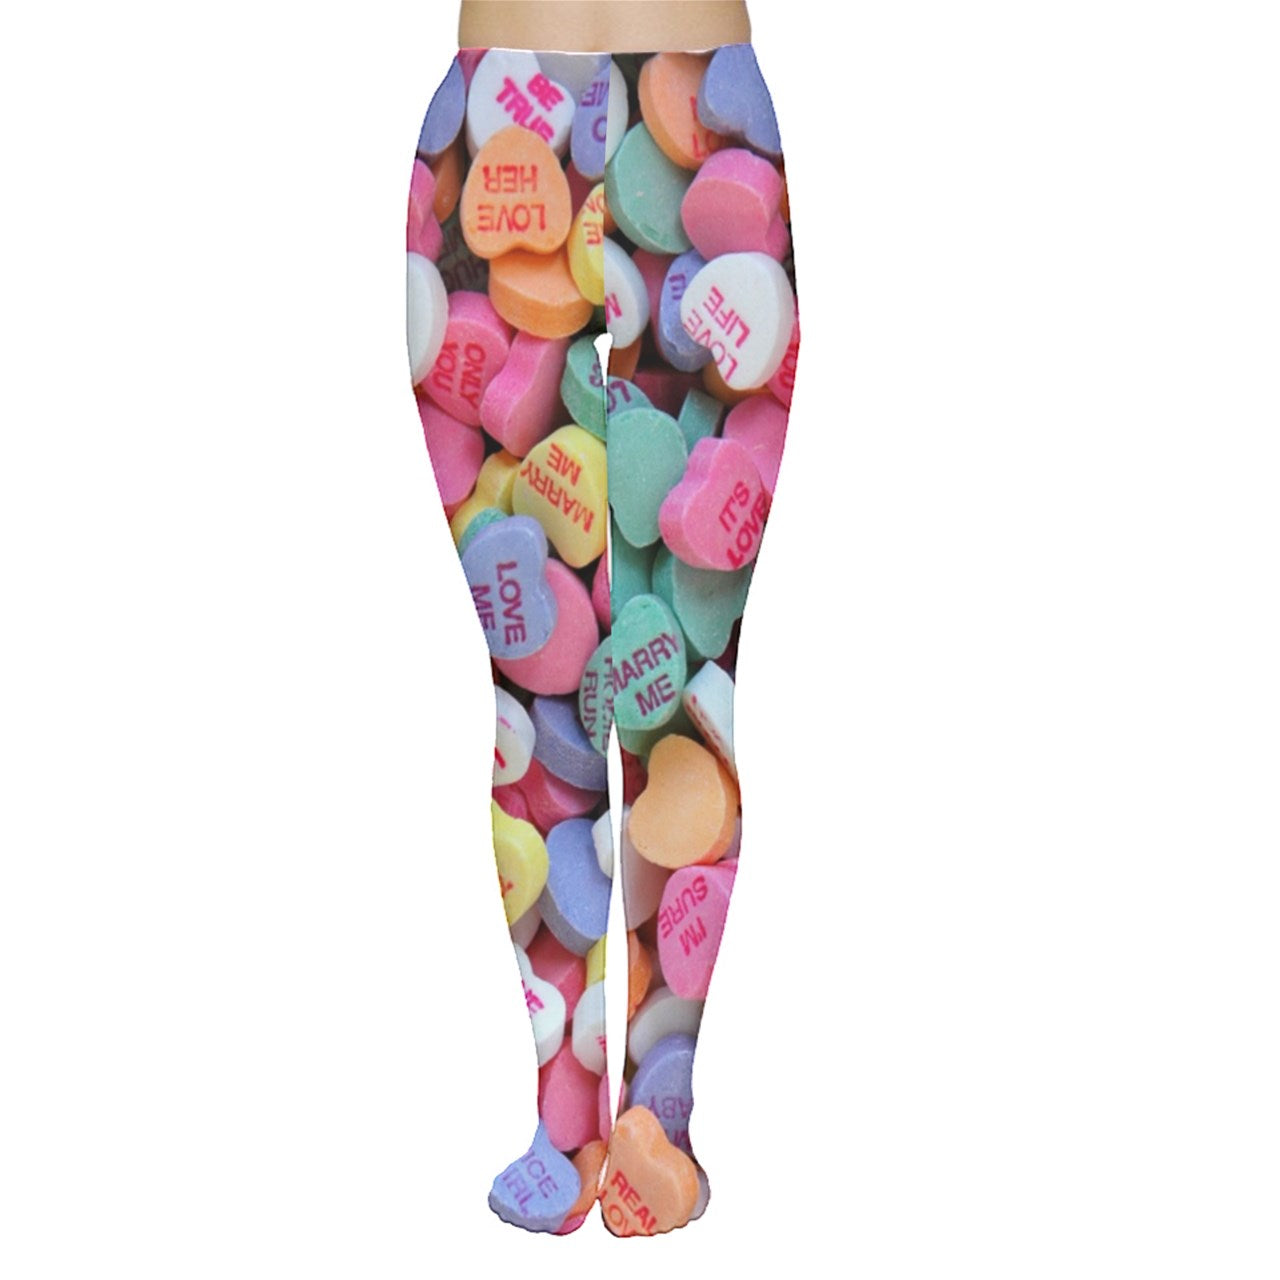 Candy Hearts Tights